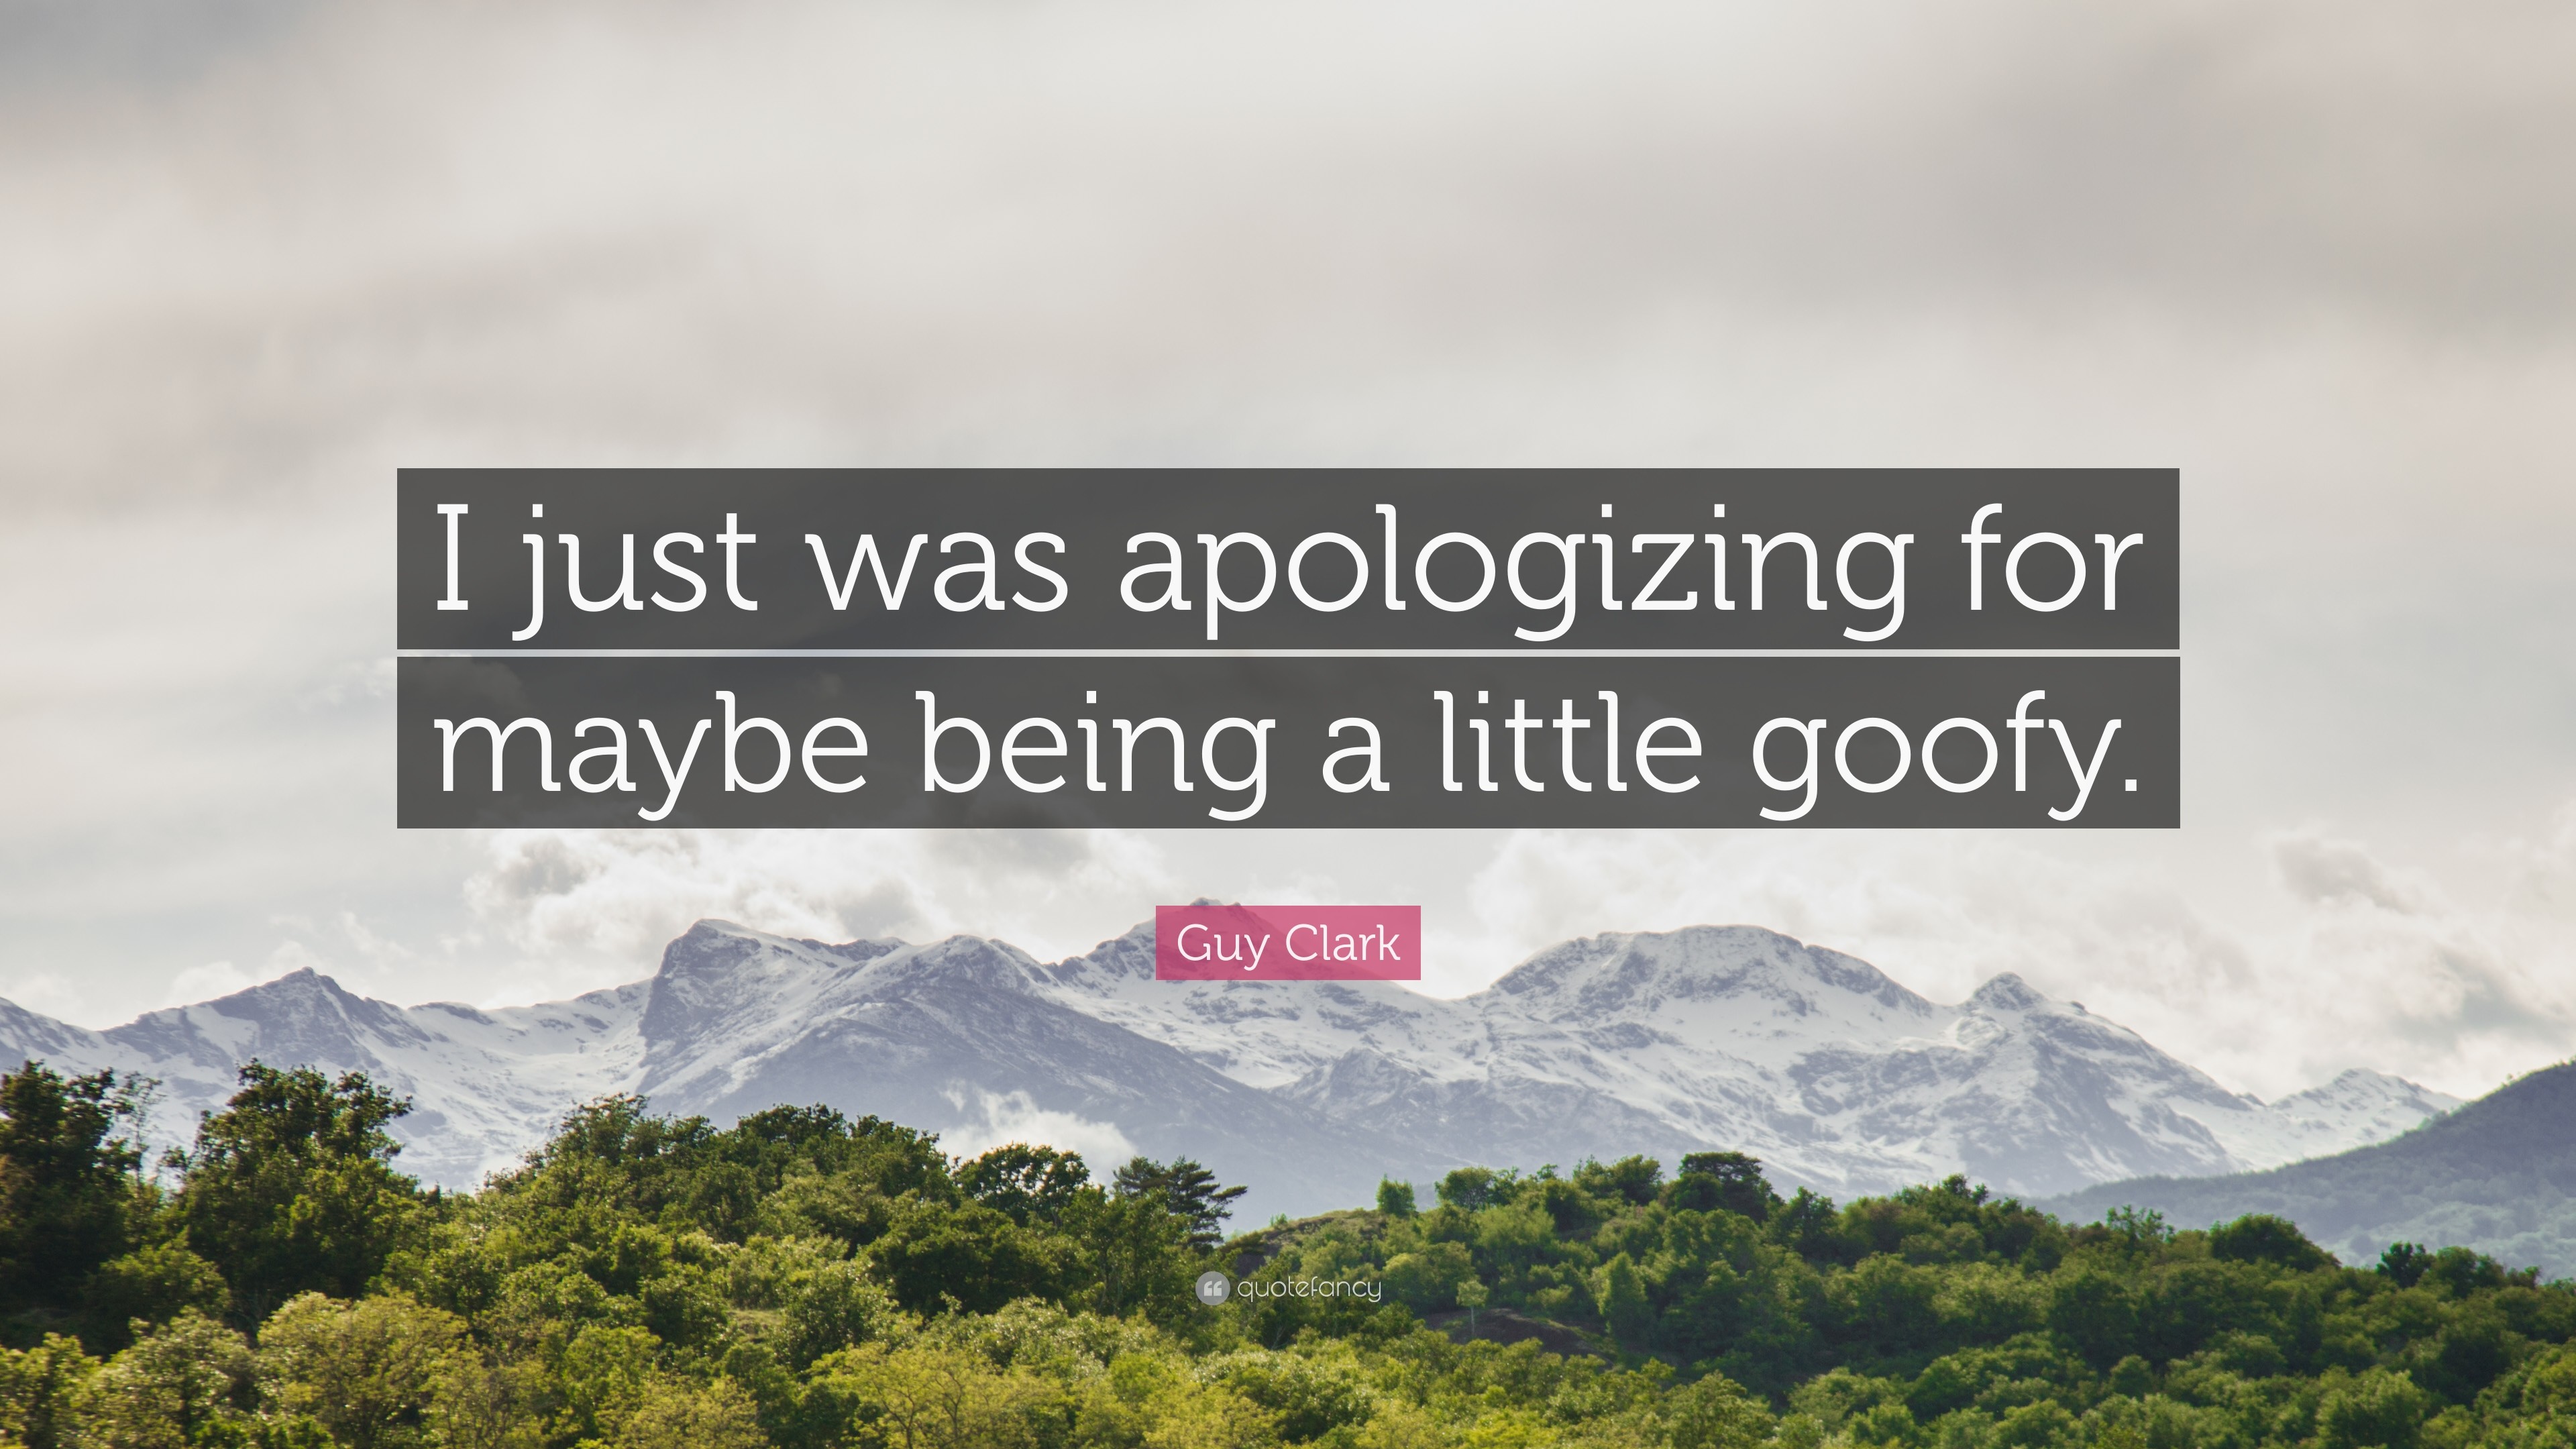 Guy Clark Quote I just was apologizing for maybe being a little goofy